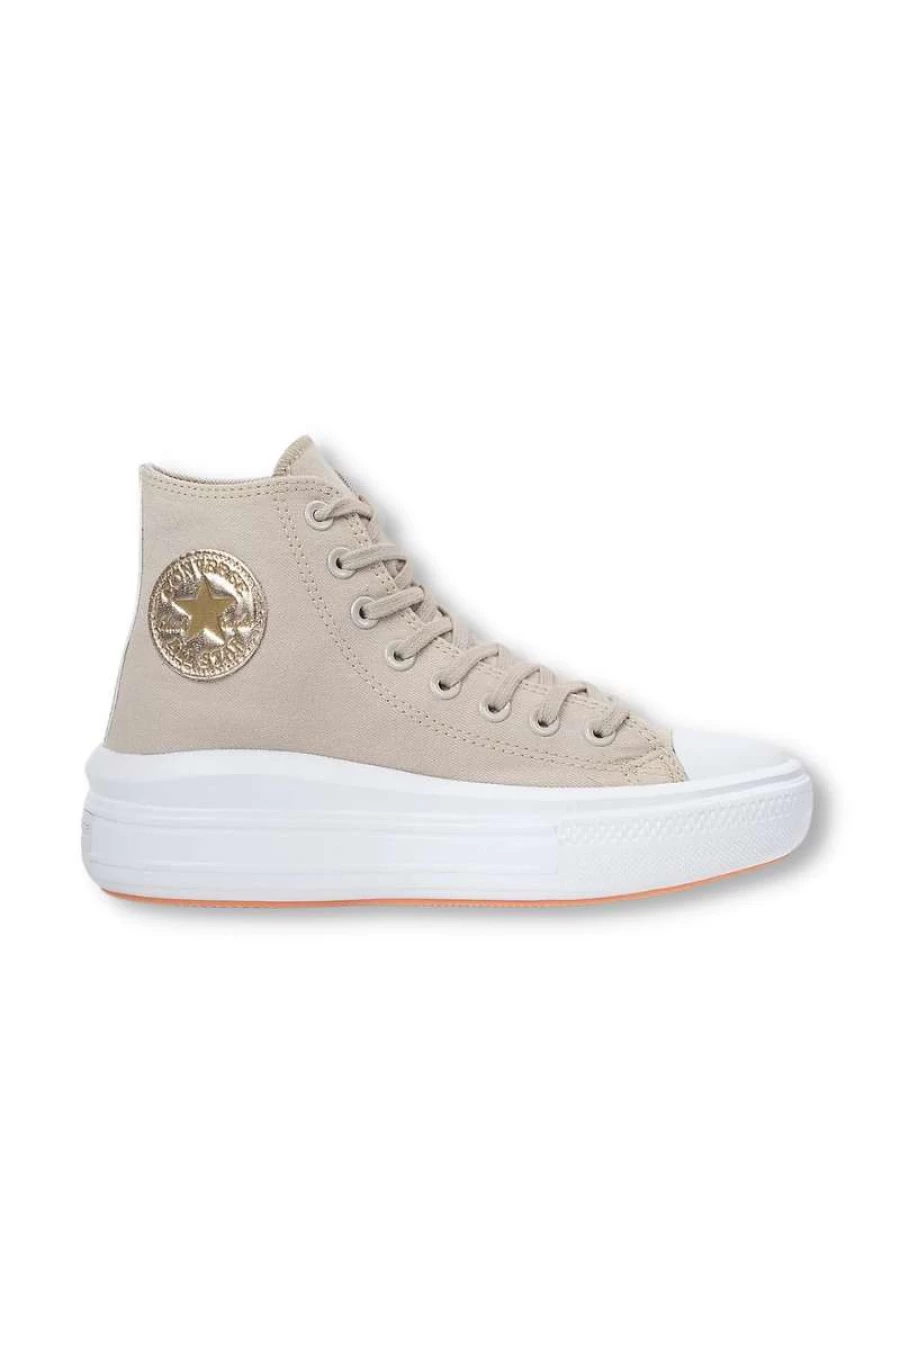 Tênis Converse Chuck Taylor All Star Hi Authentic Glam Bege Claro